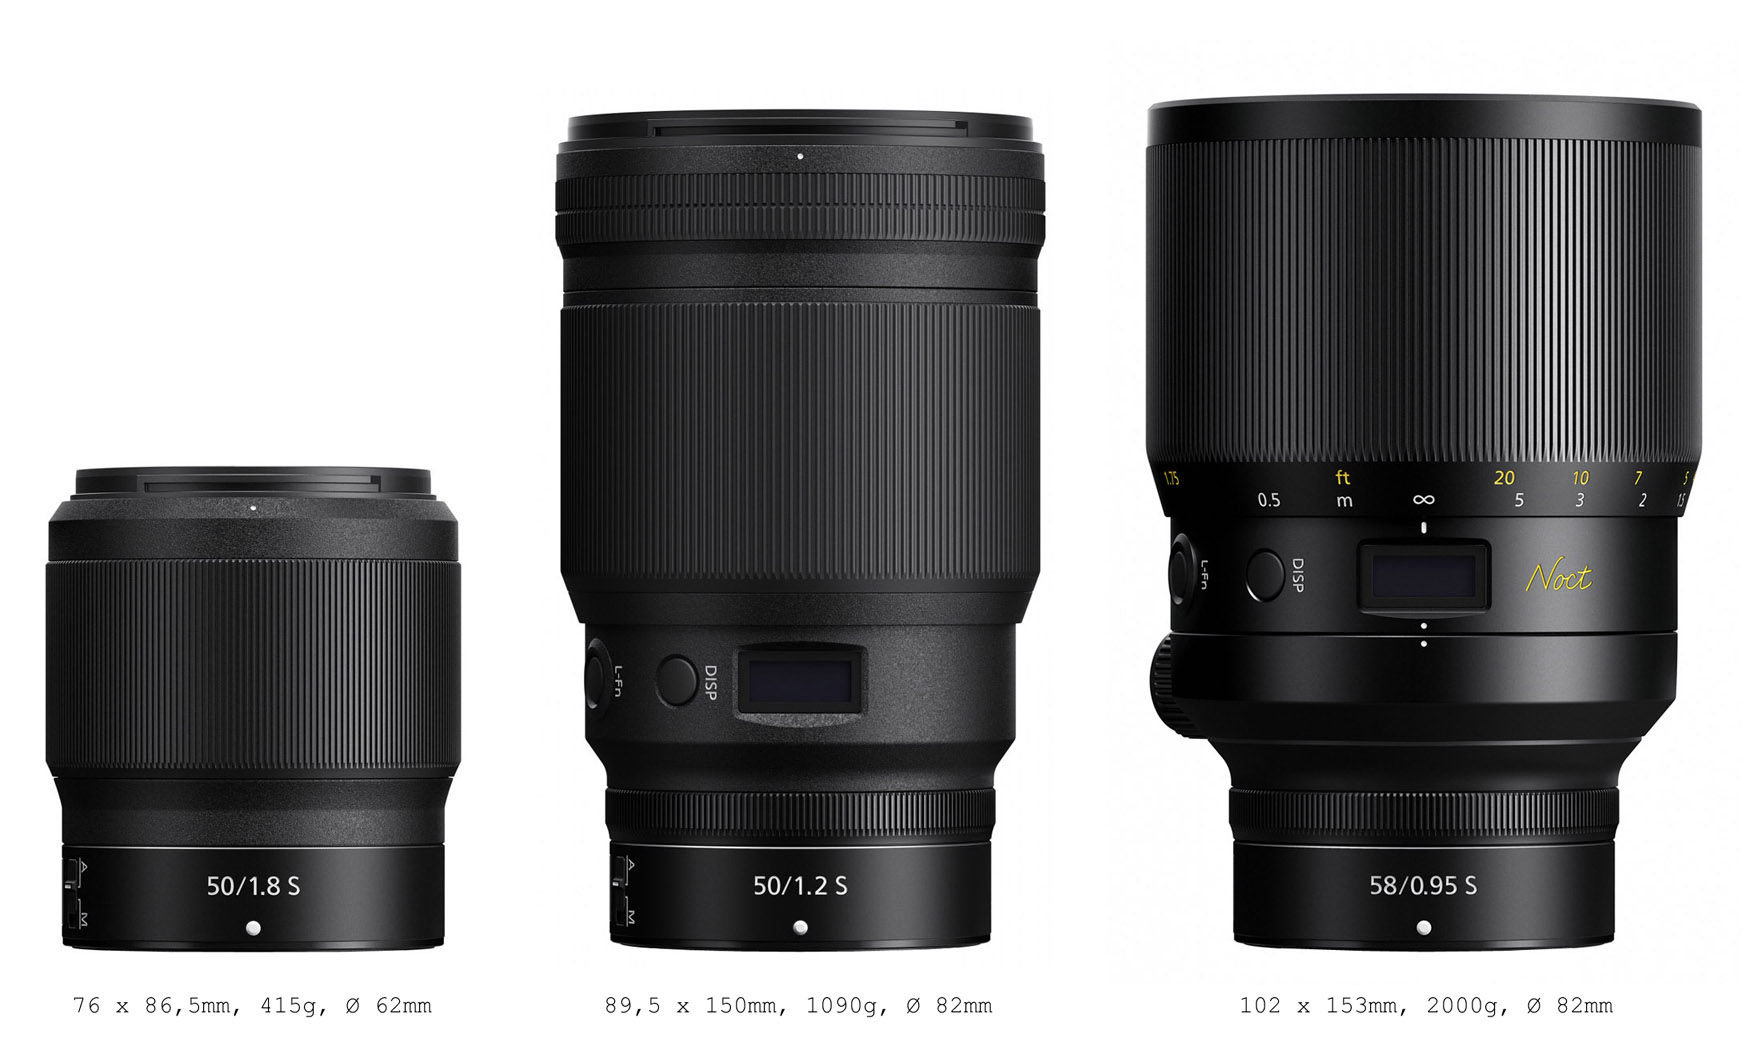 The new Nikkor Z 50mm f/1.2 S and Z 14-24mm f/2.8 S lenses 